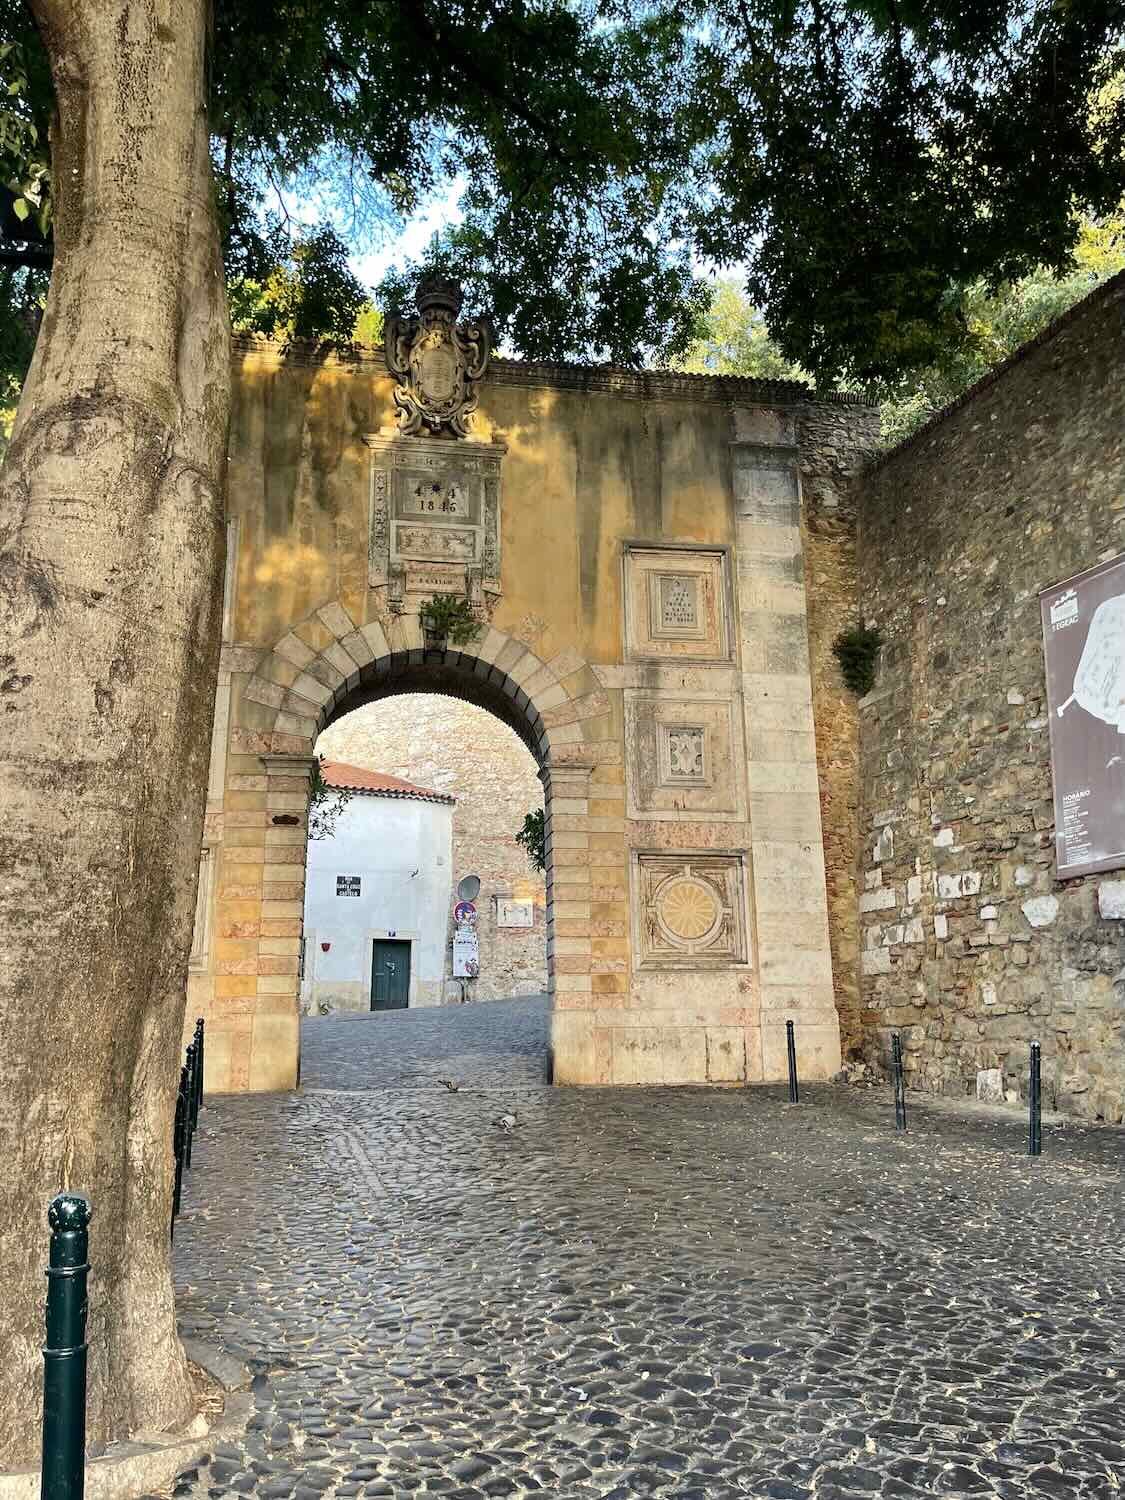 Ancient arched gateway adorned with stone carvings, leading into the shaded, cobbled streets of Lisbon's historic district